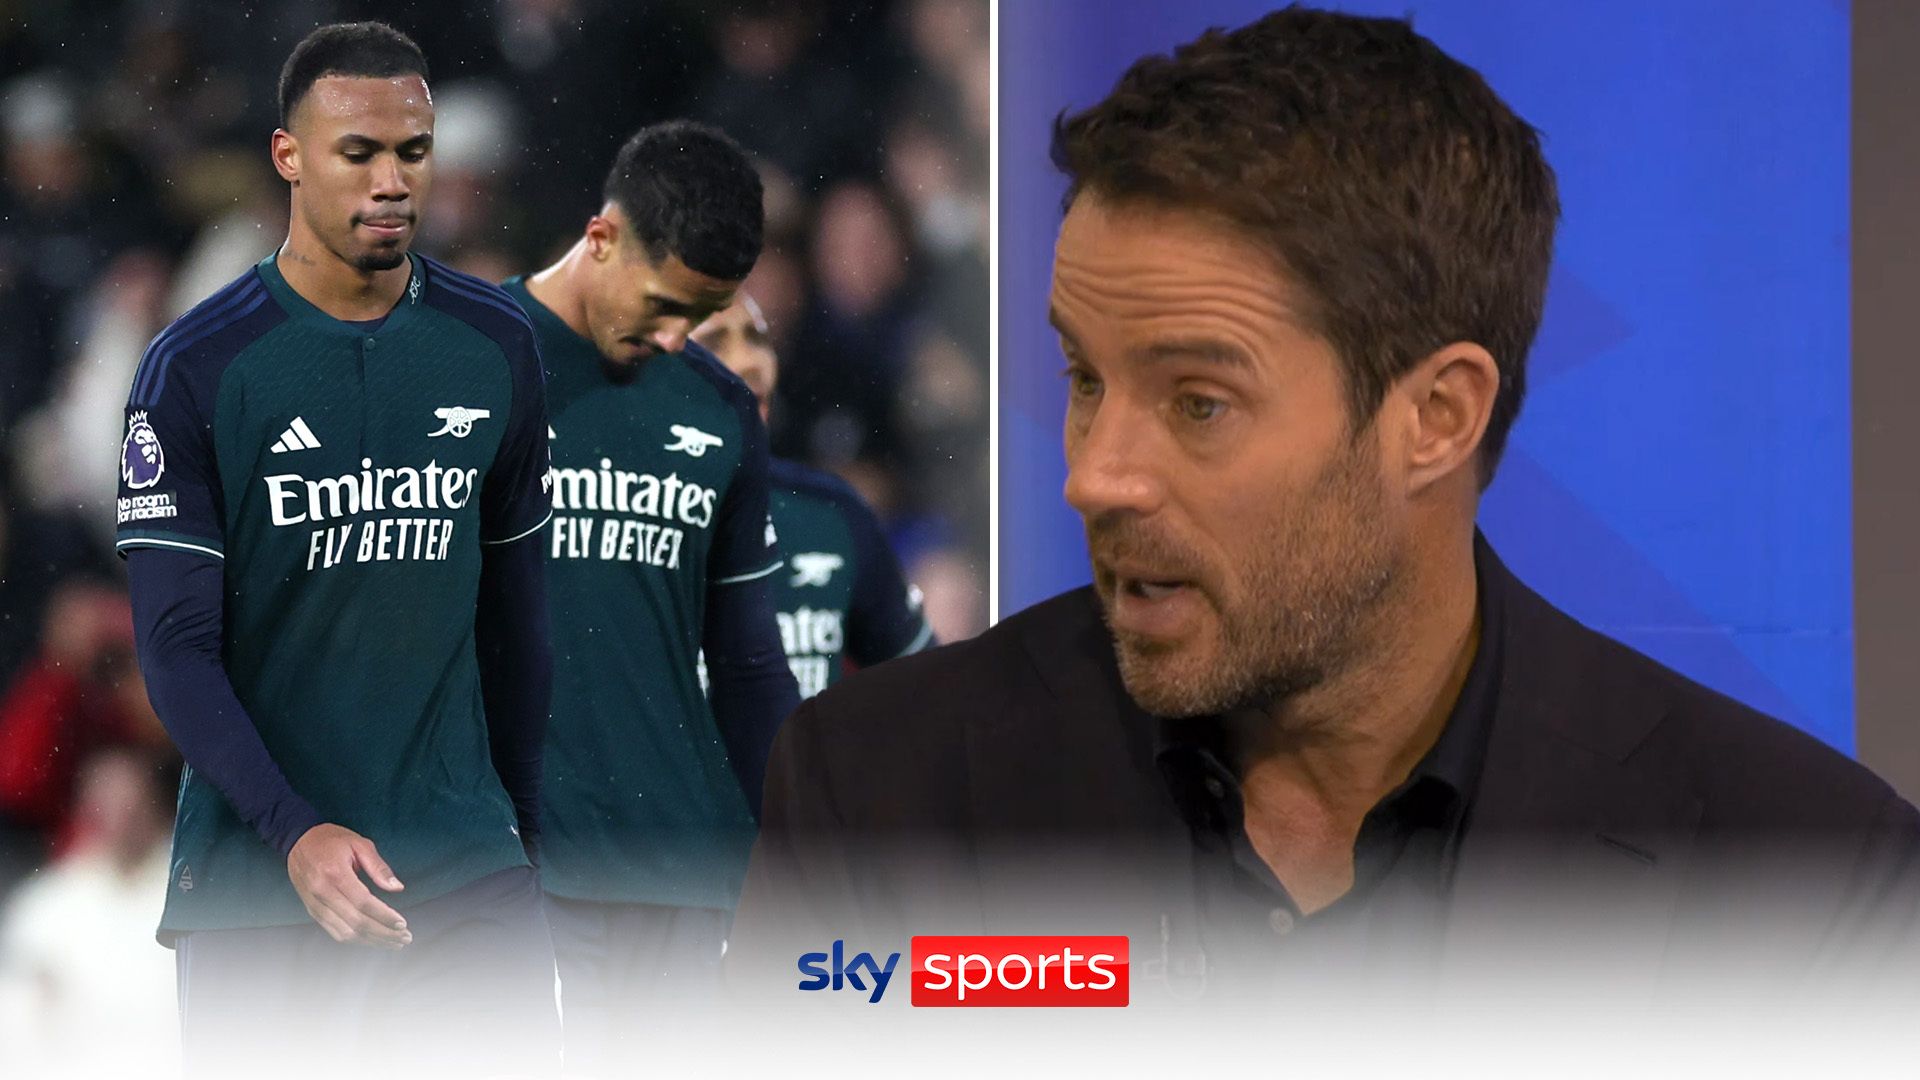 'The reality check they need' | Redknapp critical of Arsenal display at Fulham